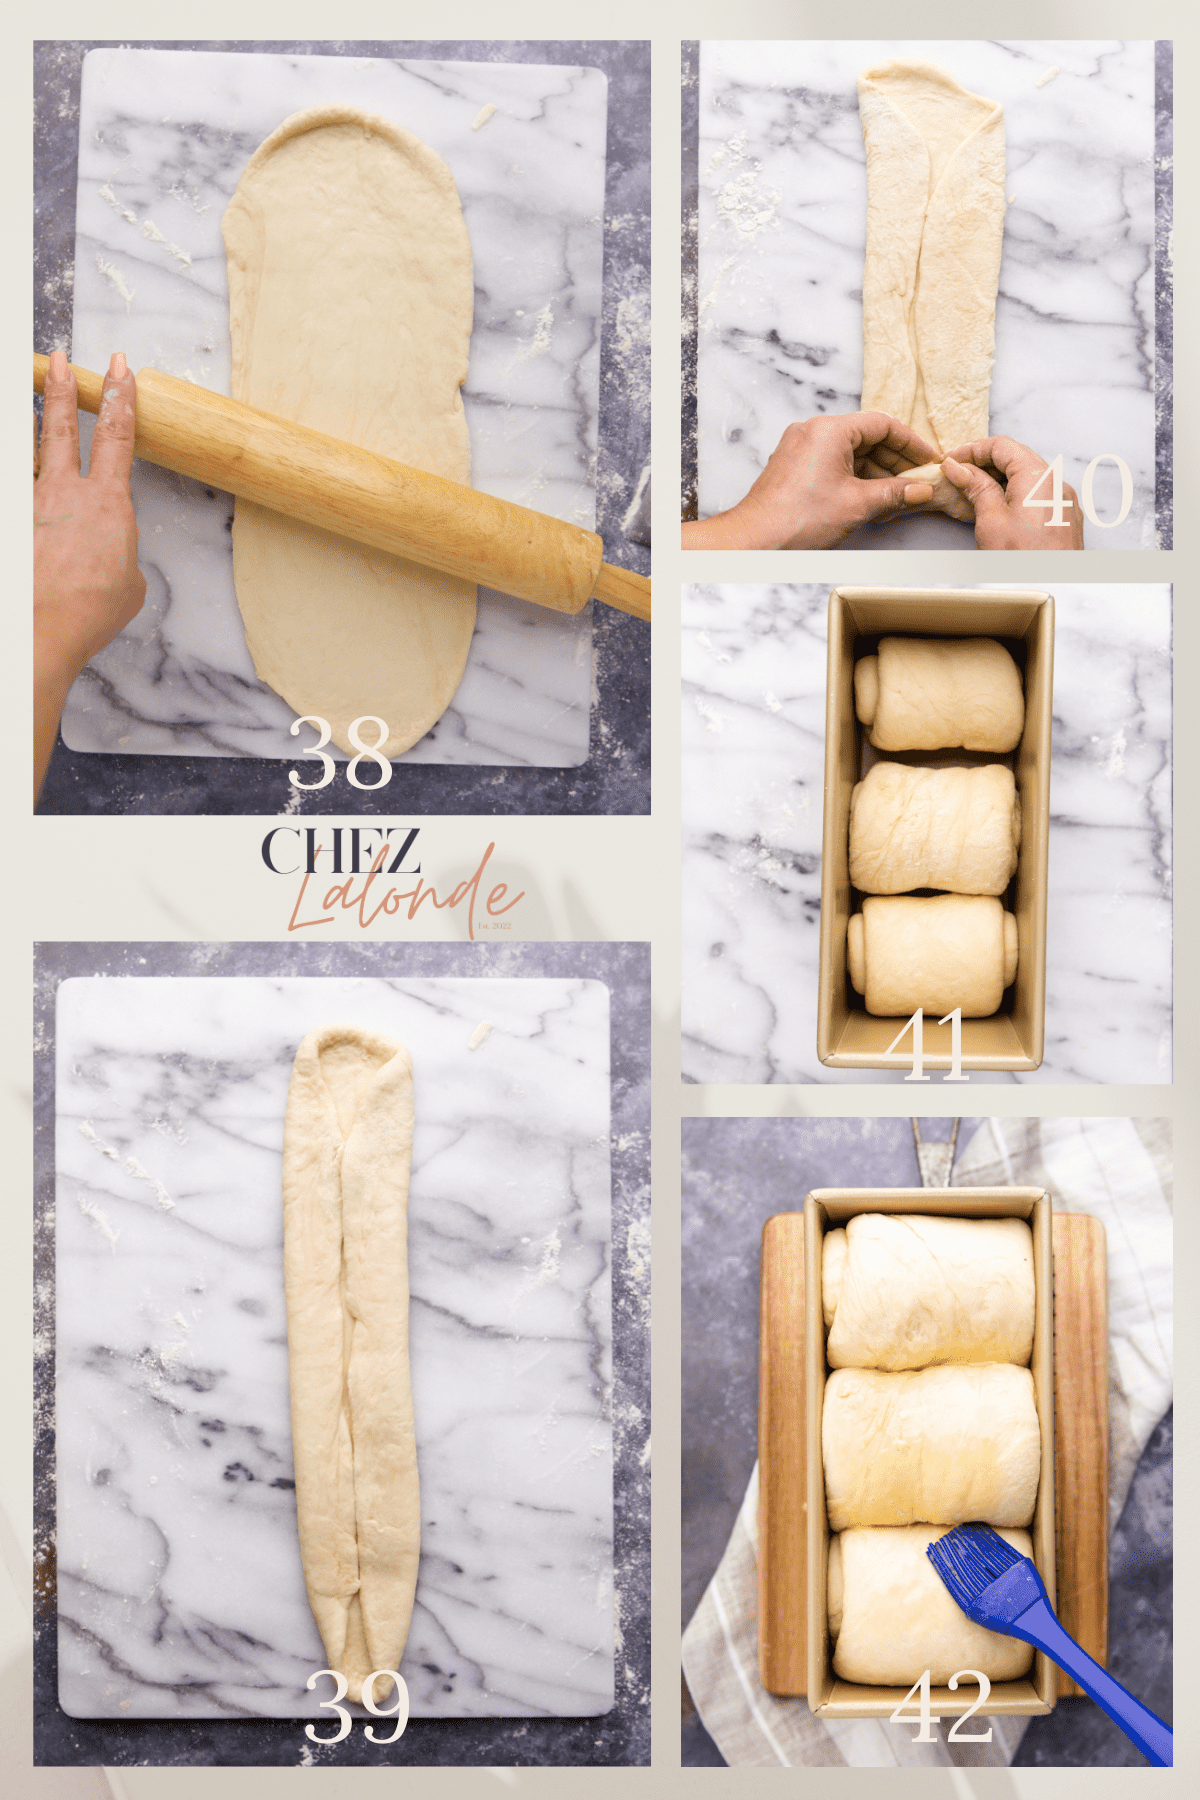 Step by step on how to prepare and bake the Japanese Bread 